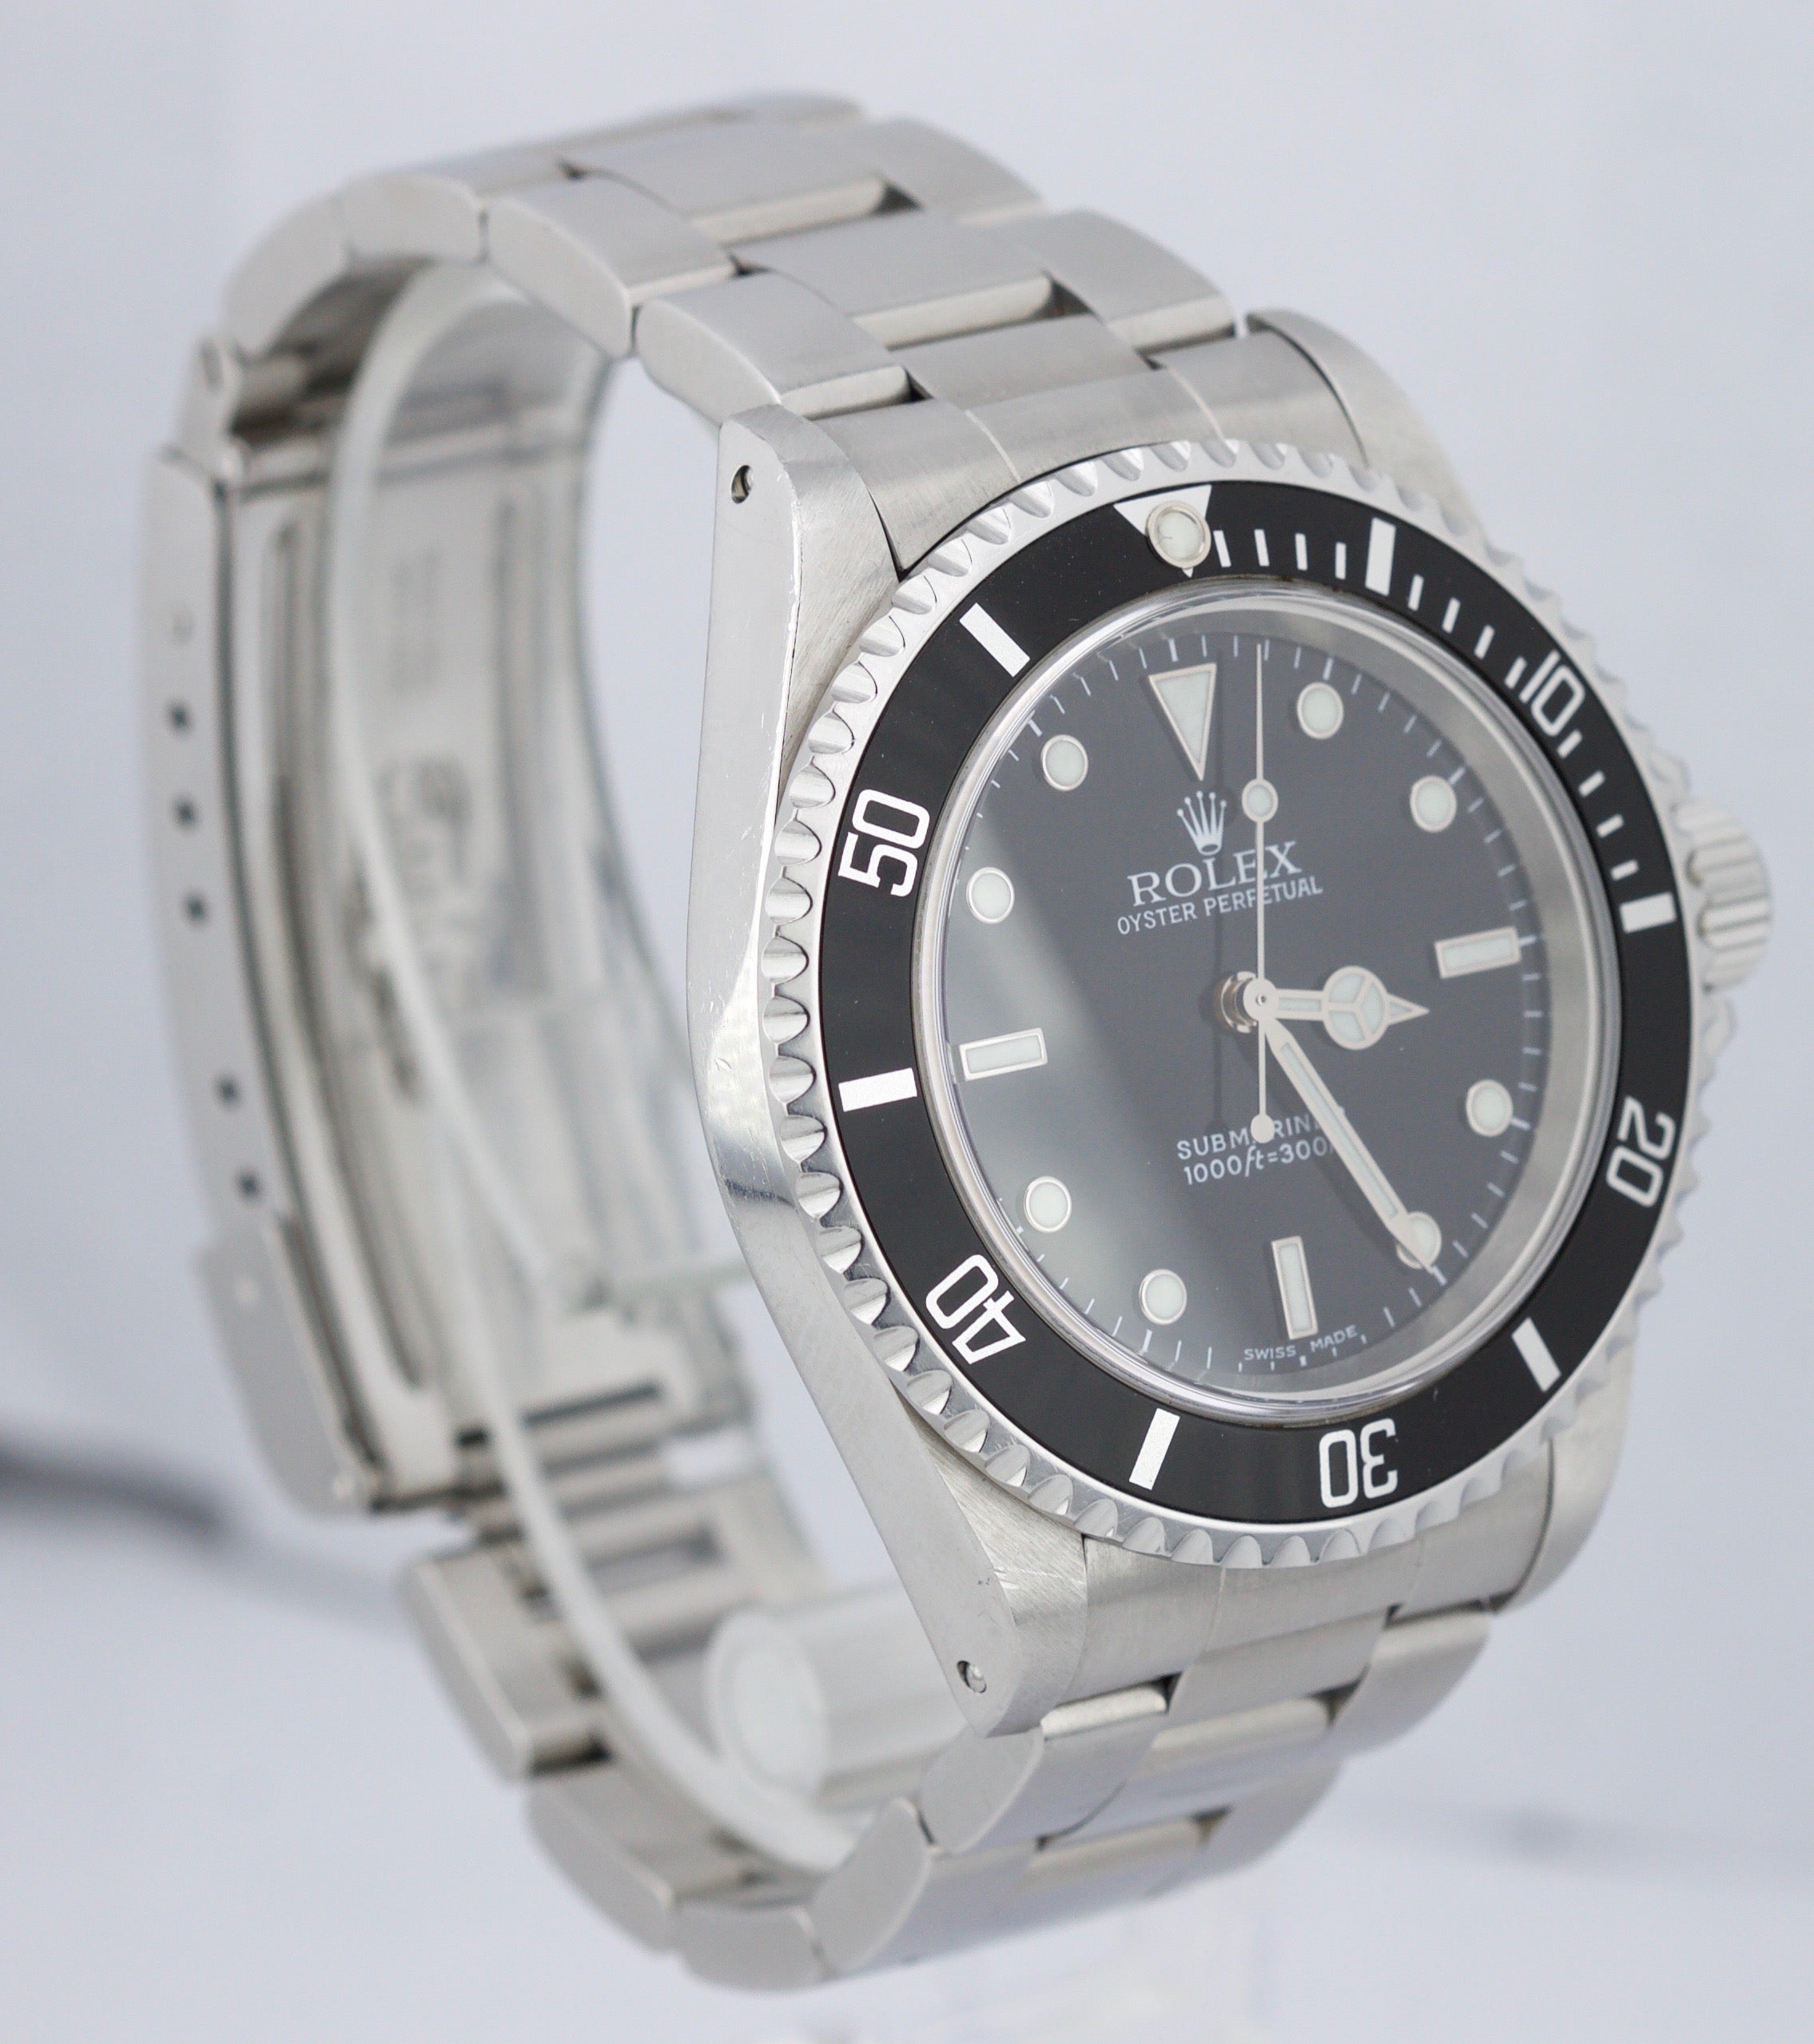 2000 UNPOLISHED Rolex Submariner No-Date 14060 M Stainless Black Dive 40mm Watch